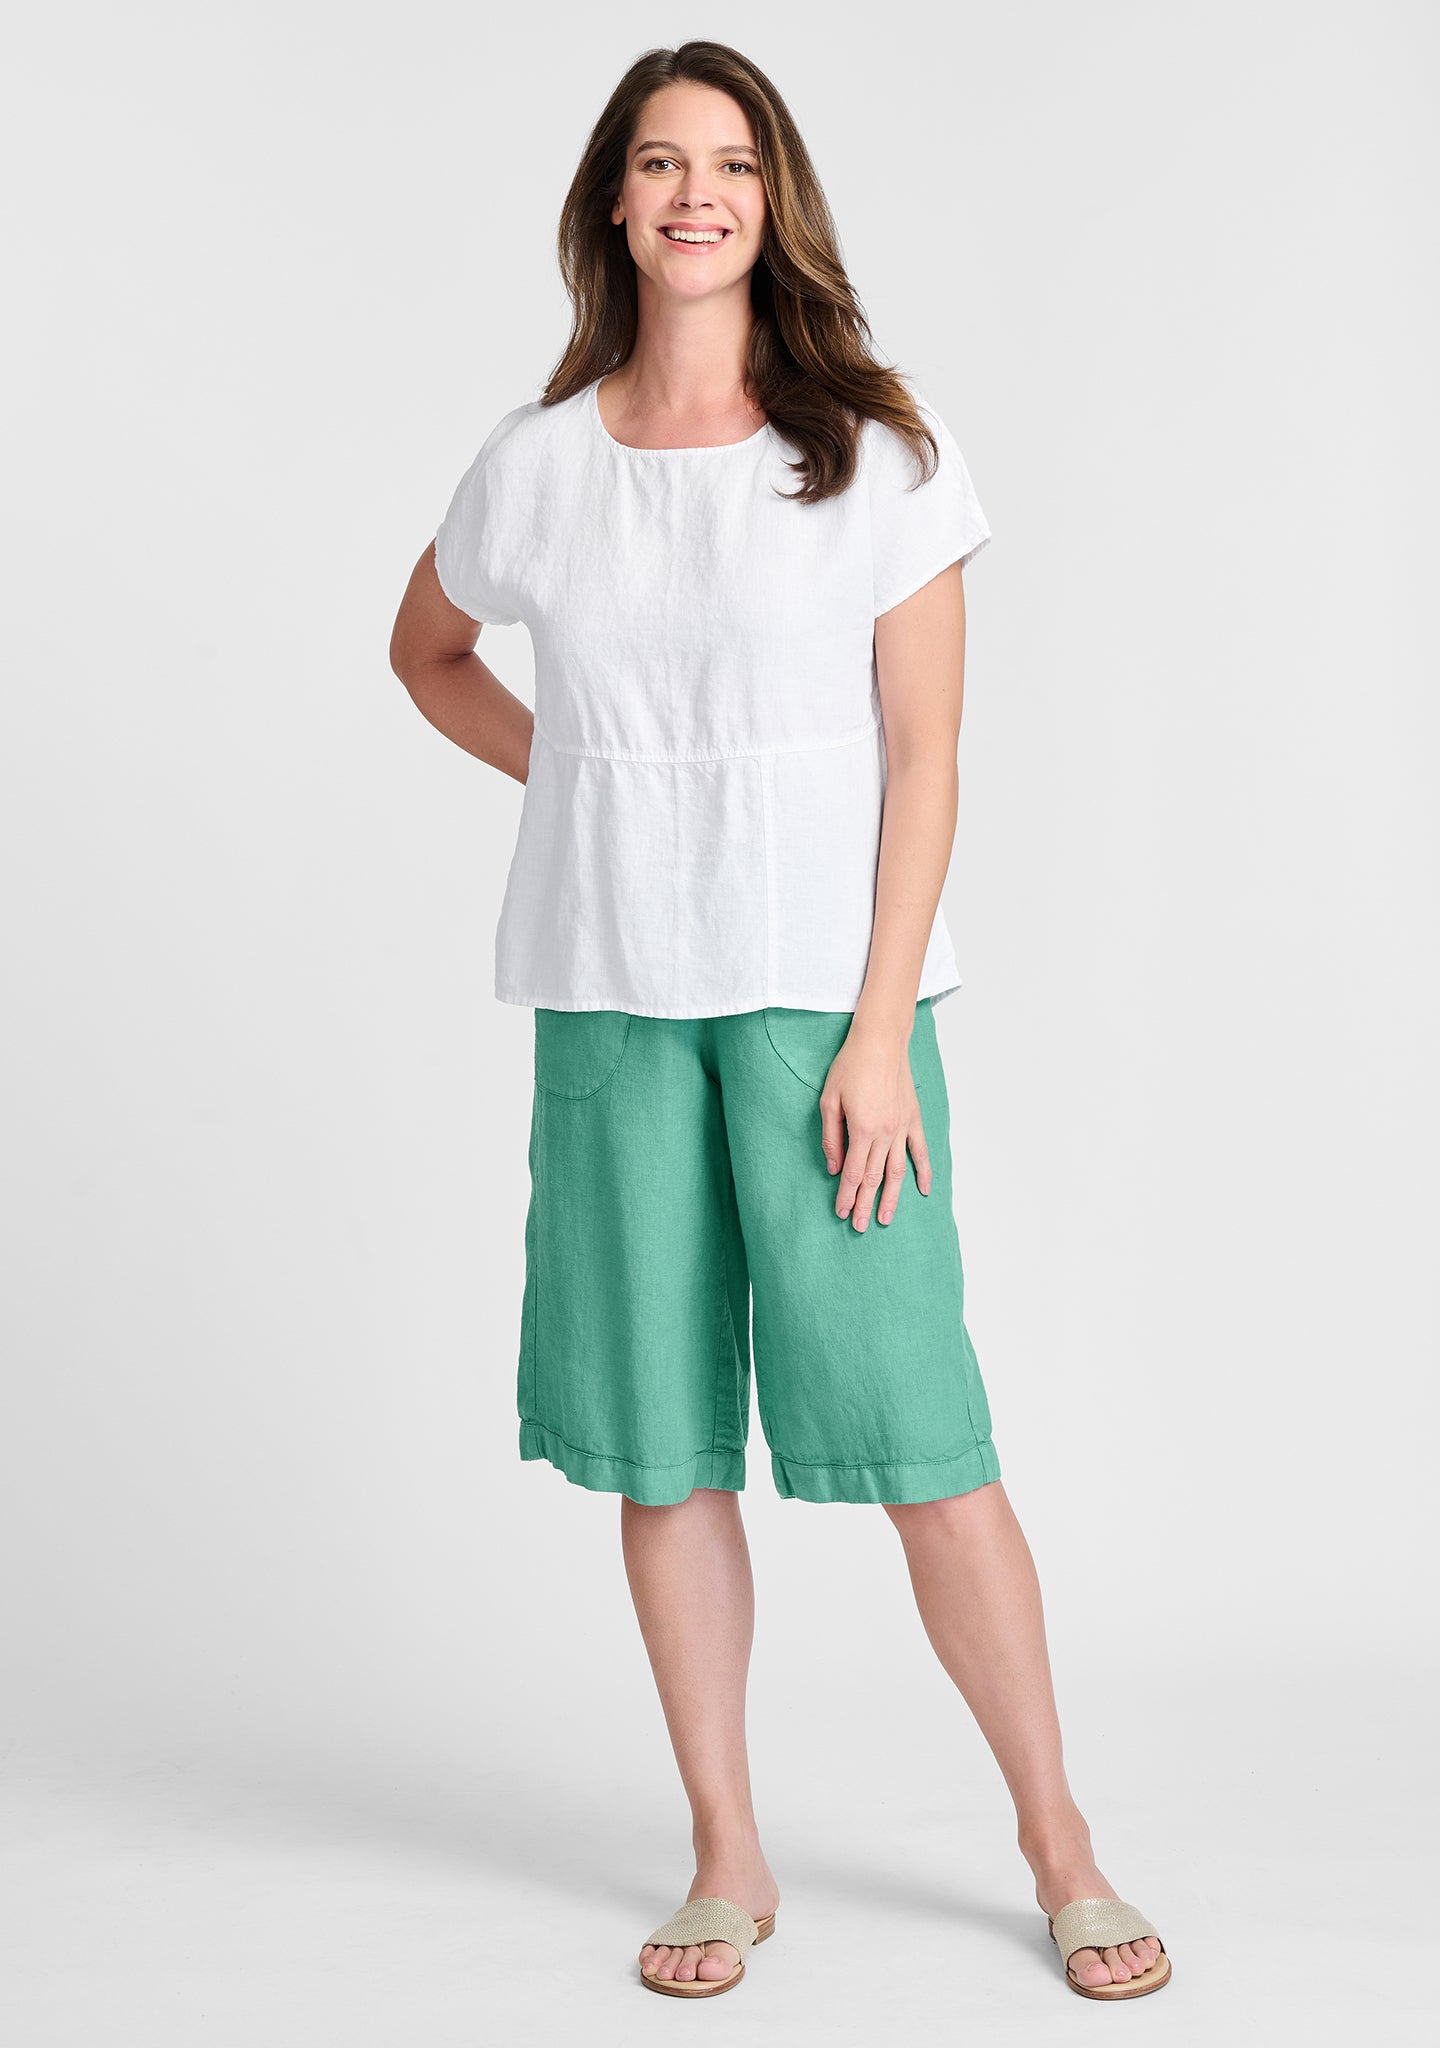 FLAX linen shirt in white with linen shorts in green